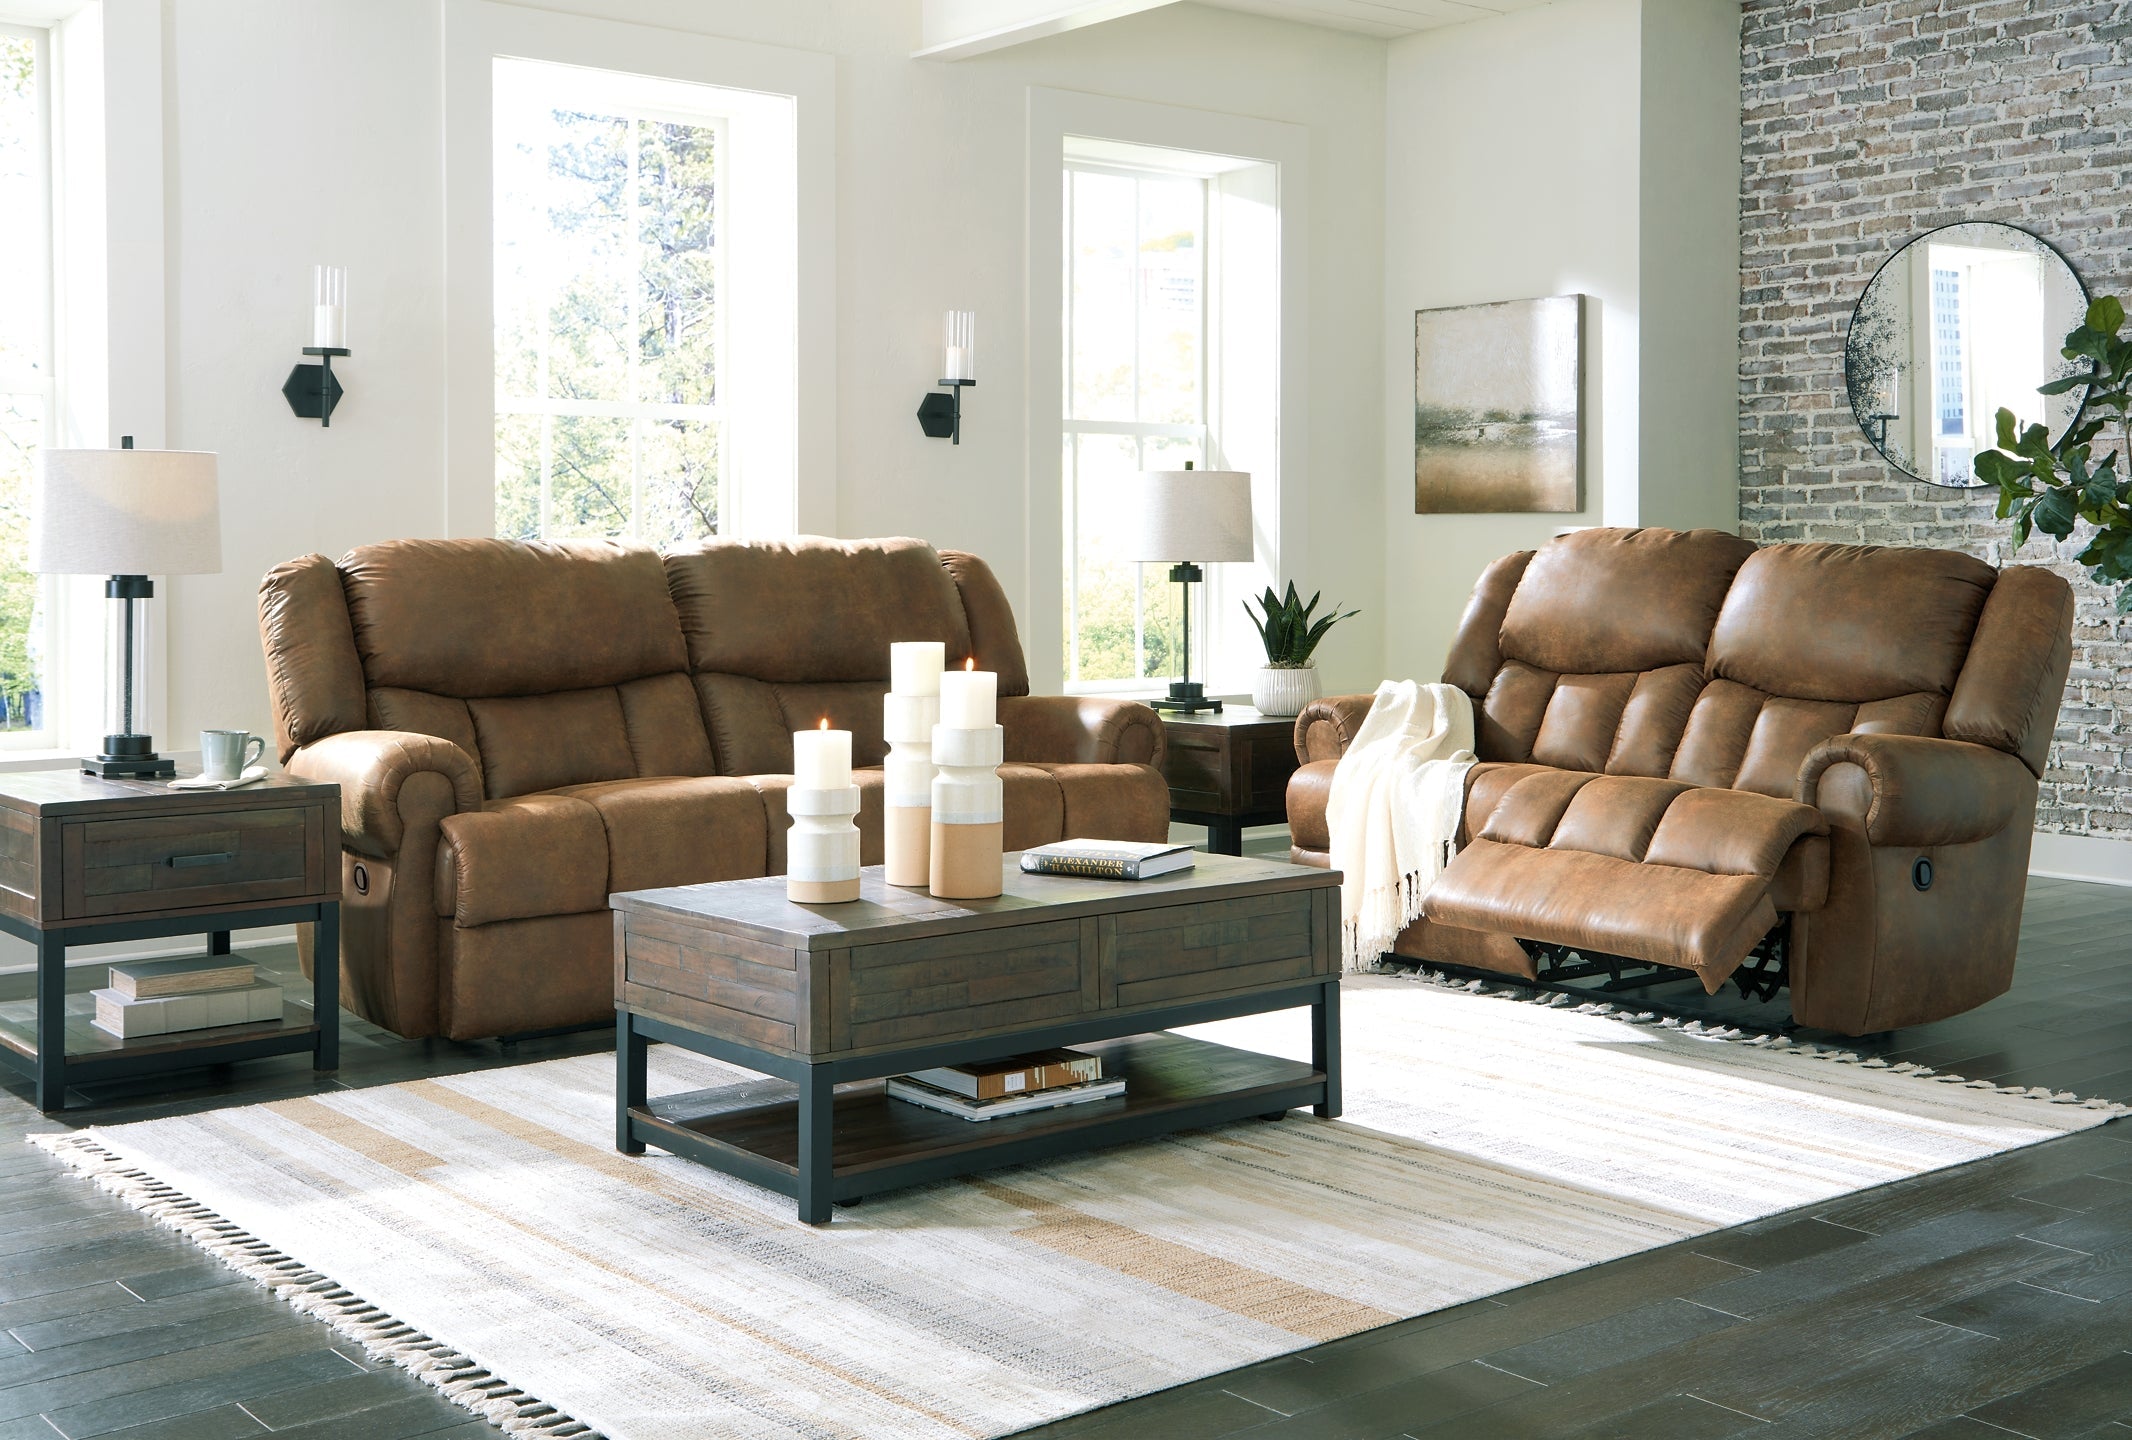 Boothbay Manual Reclining Sofa and Loveseat